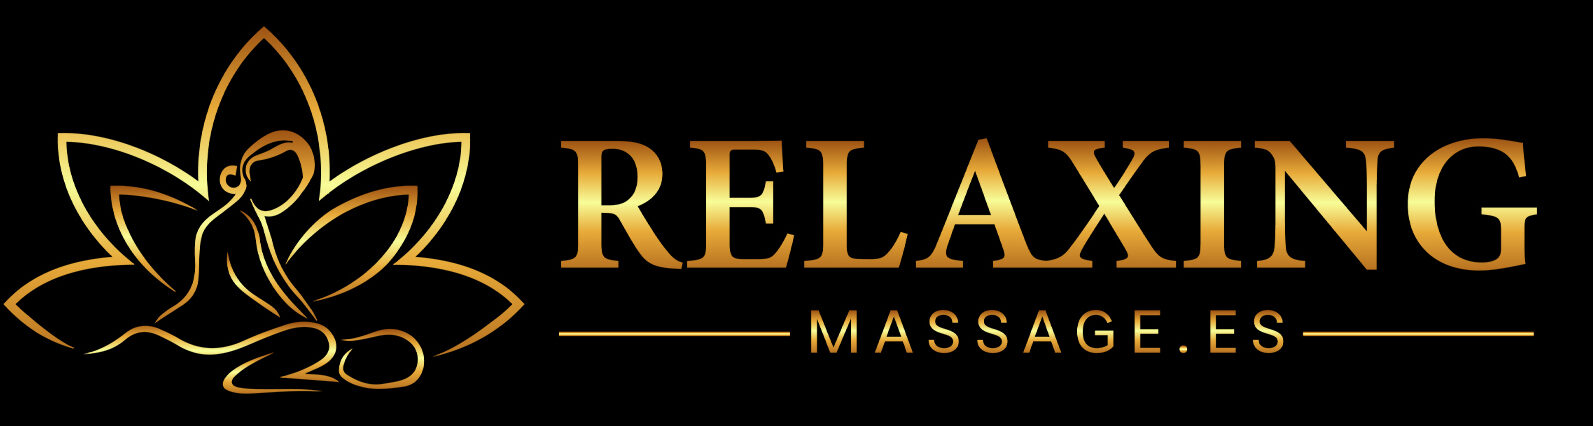 Relaxing massage Valencia